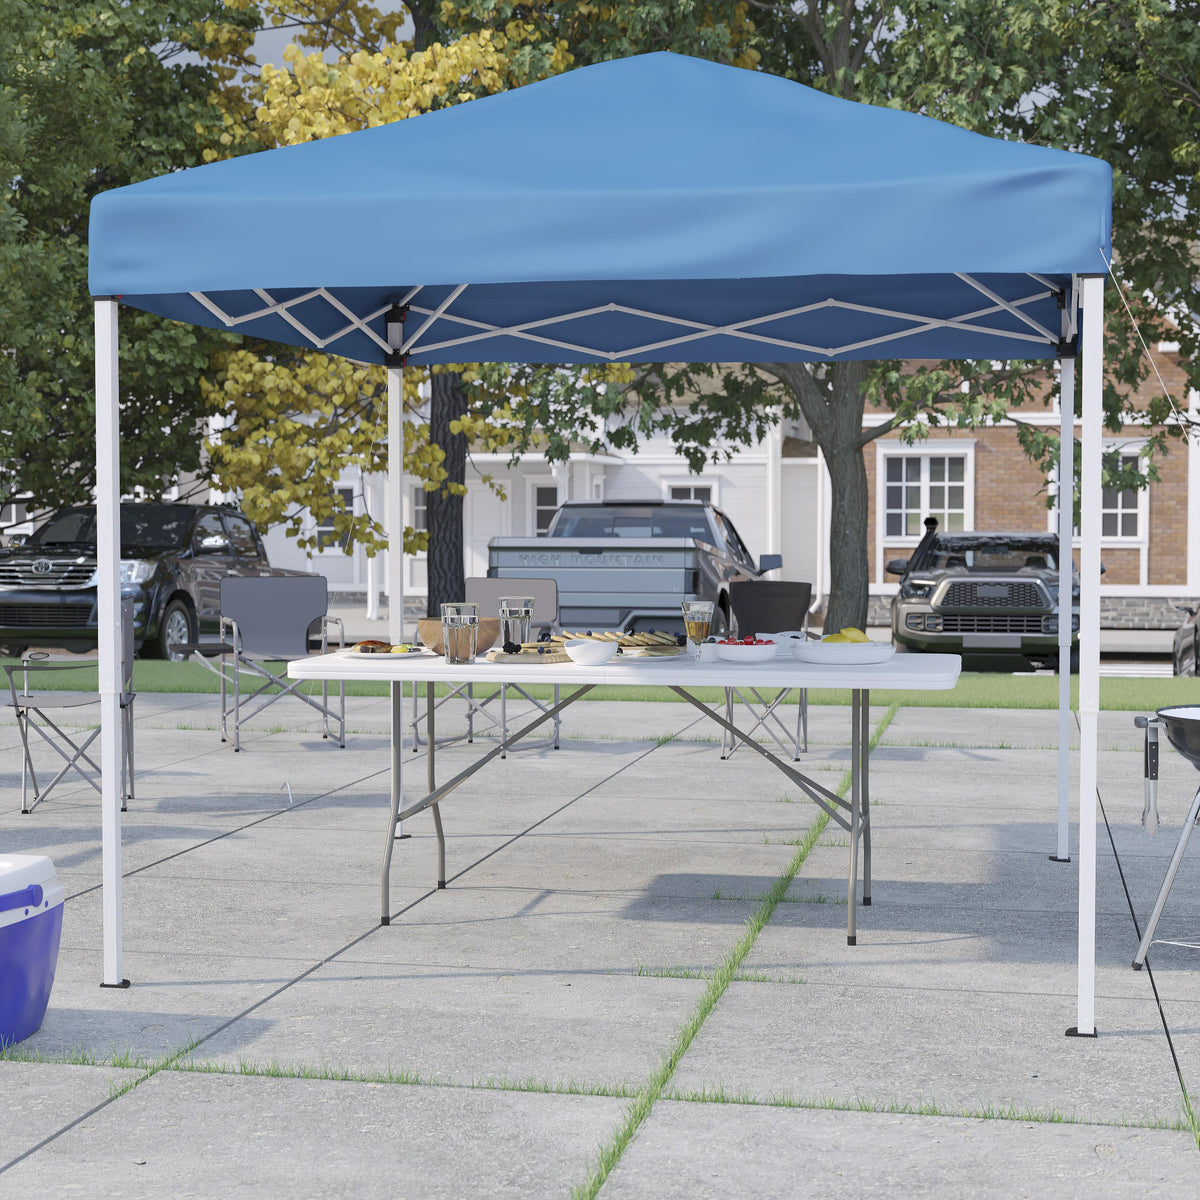 Blue |#| 8' x 8' Blue Pop Up Canopy Tent and 6 Ft. Bi-Fold Table with Carrying Handle